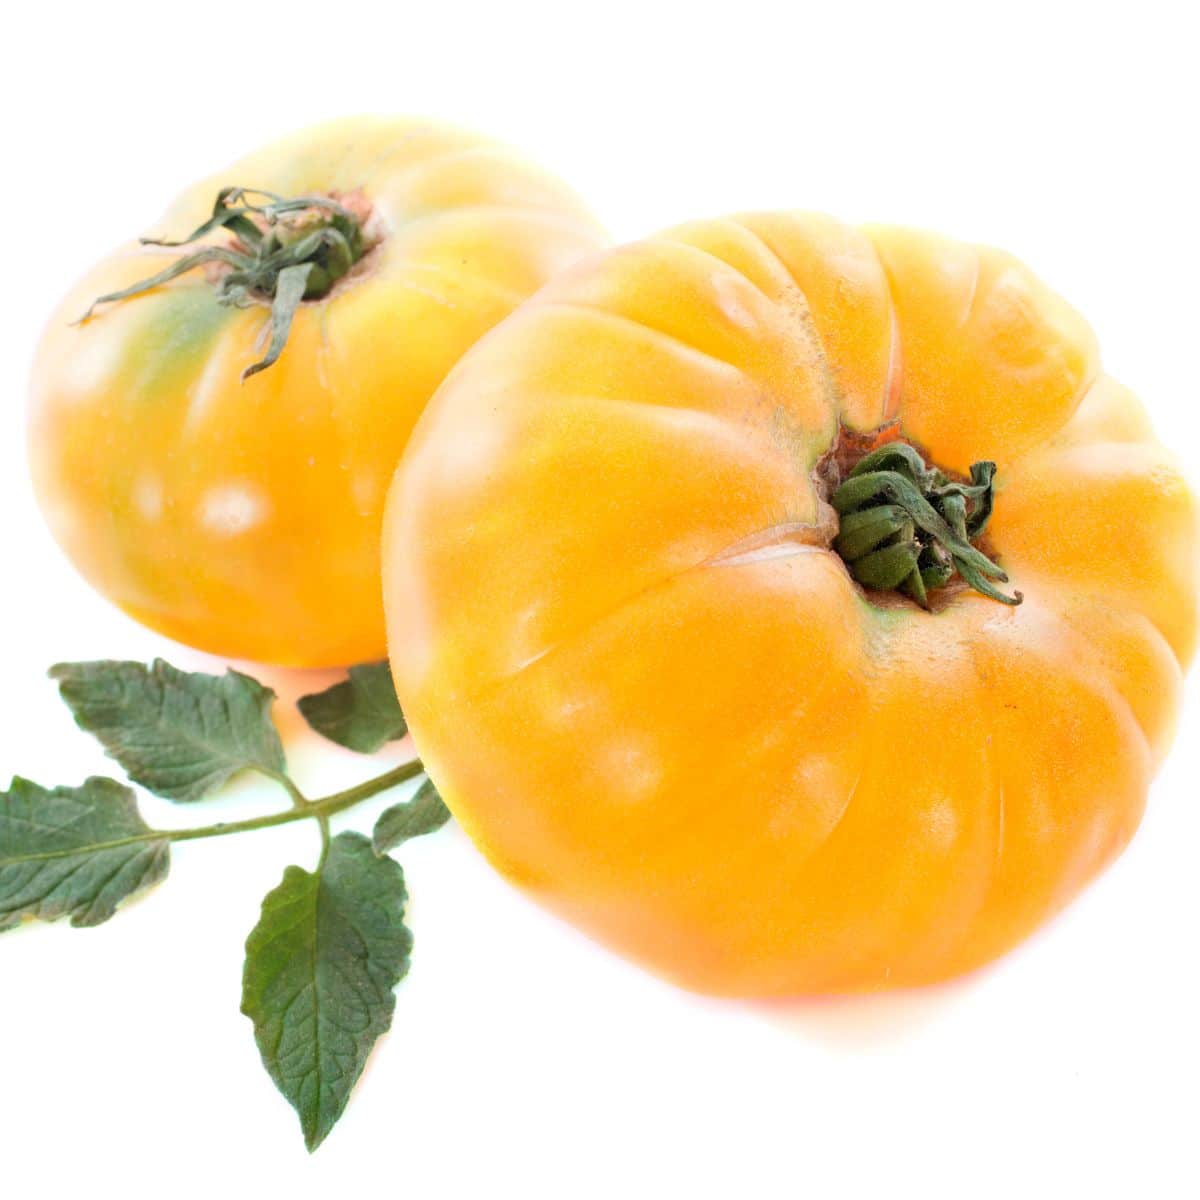 Two pineapple tomatoes on a white background.